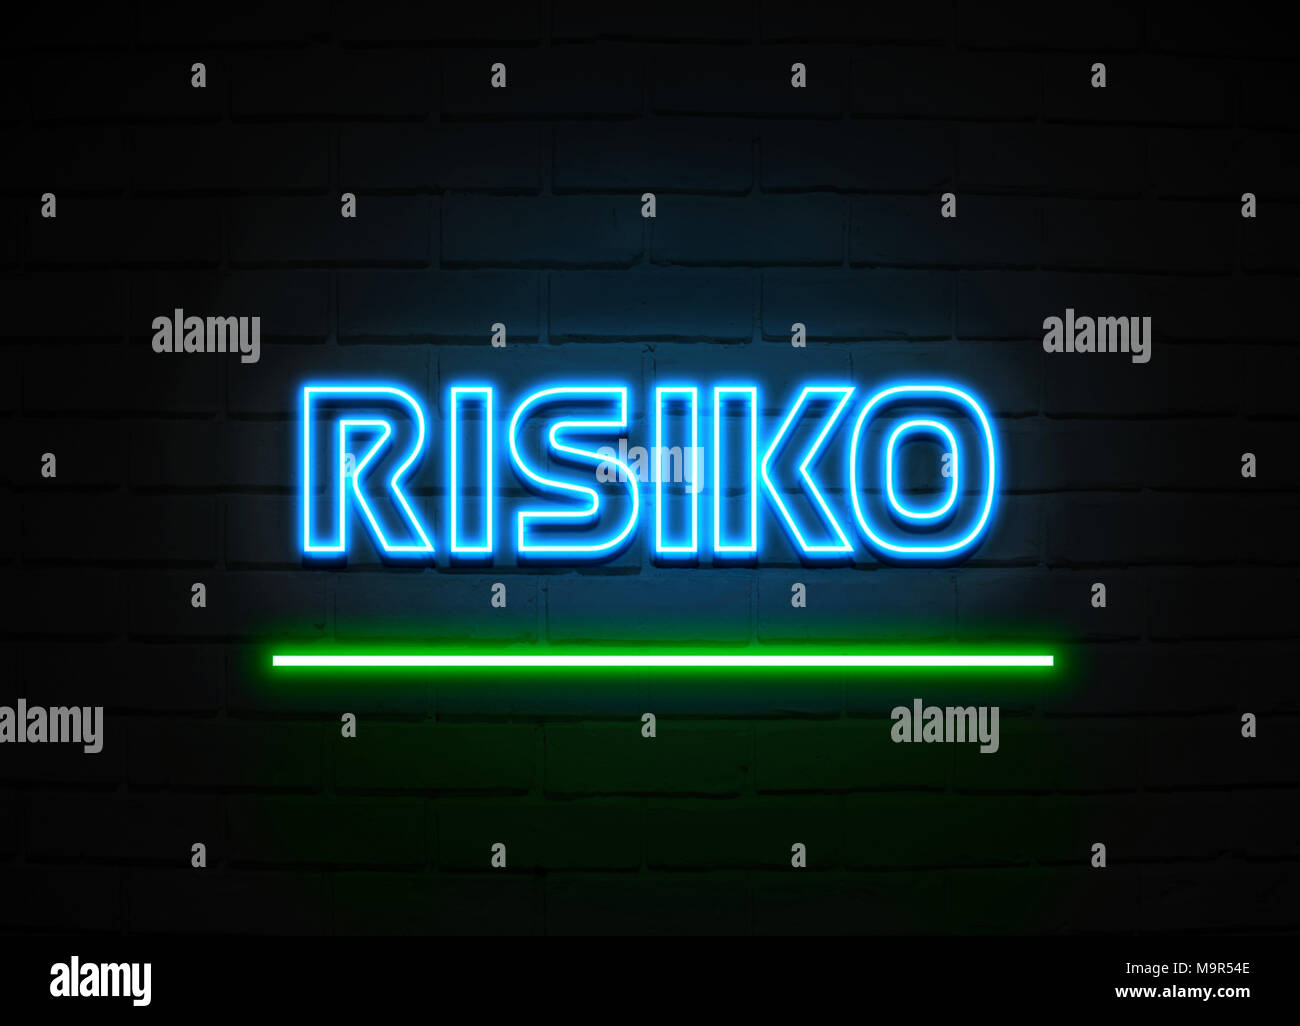 Risiko neon sign - Glowing Neon Sign on brickwall wall - 3D rendered royalty free stock illustration. Stock Photo